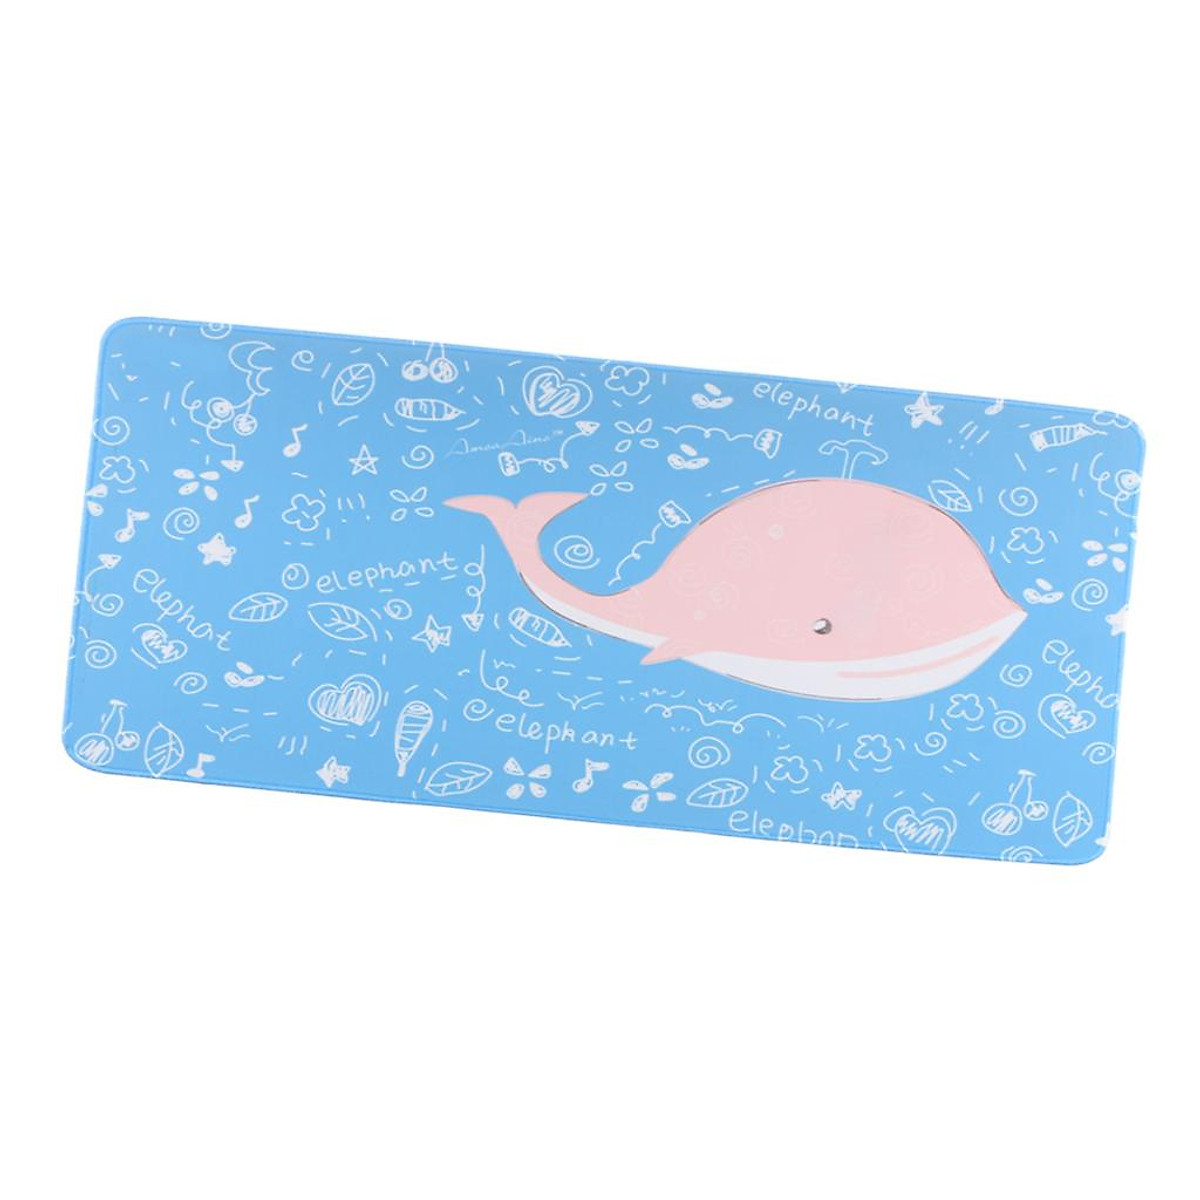 Mua Cartoon-Whale Gaming Mouse Pad Wide Mousepad Keyboard Mouse Mat -  700x300x3mm tại Magideal2